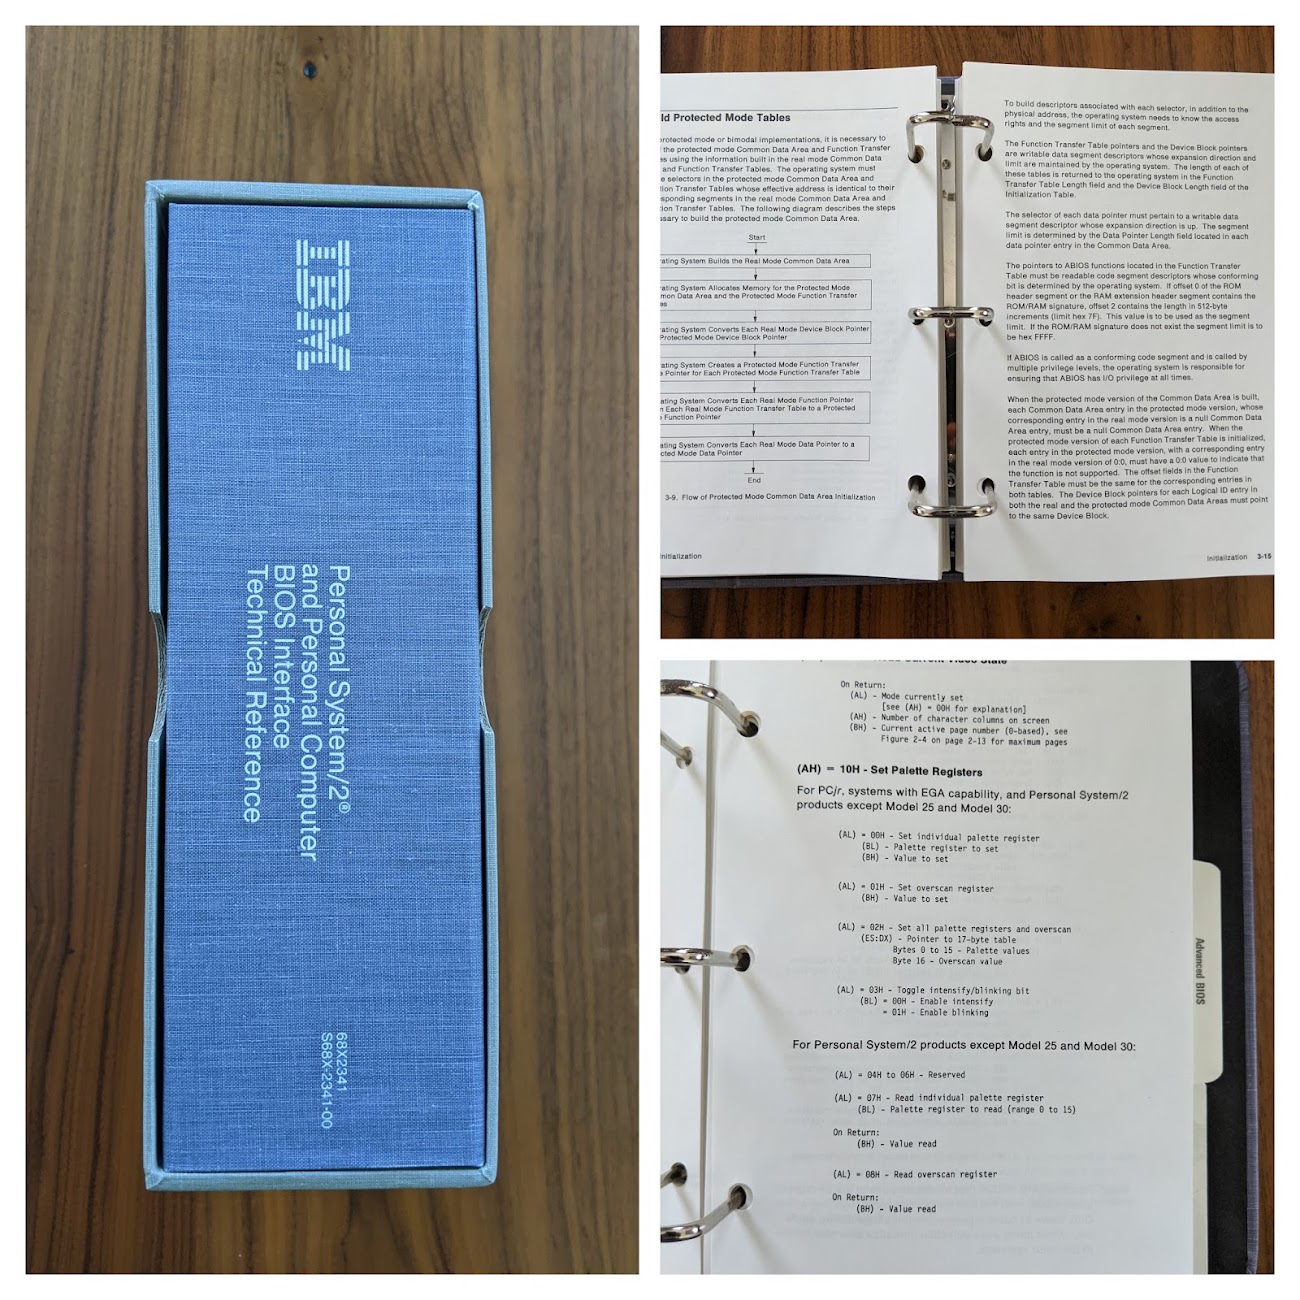 Personal System/2 and Personal Computer BIOS Interface Technical Reference (1987)